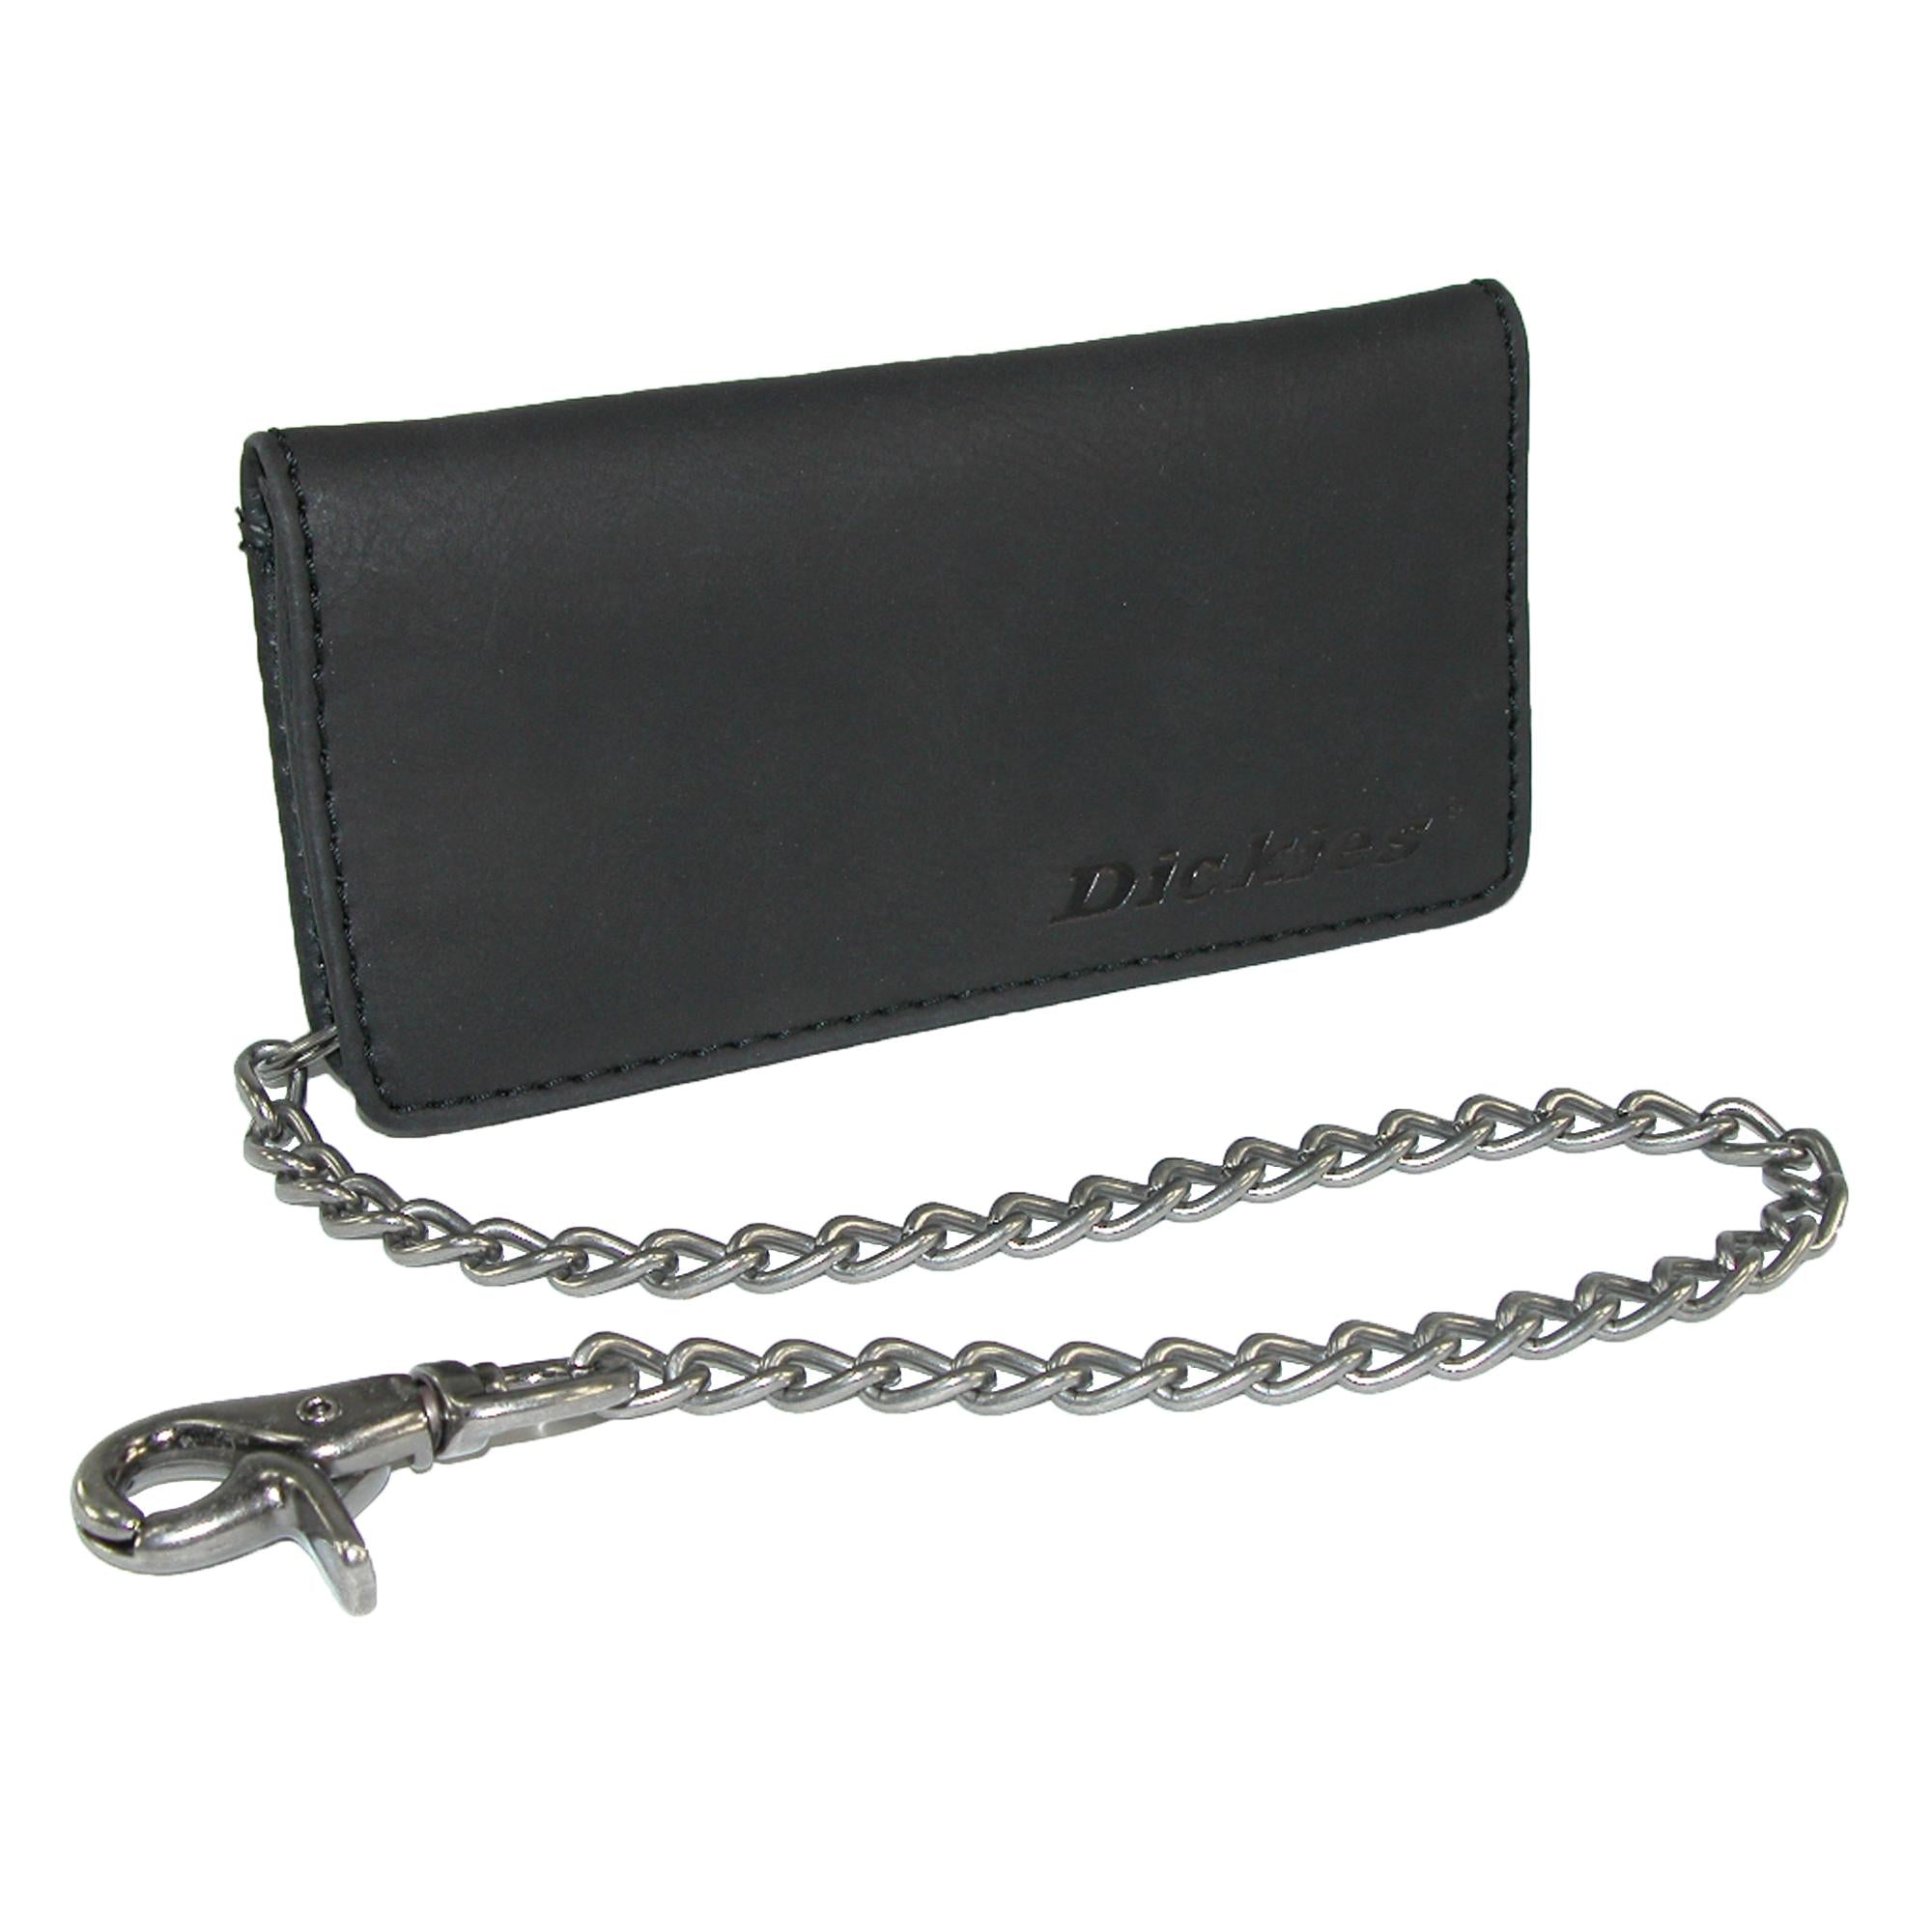 Wallet on a Chain Wallets For Women